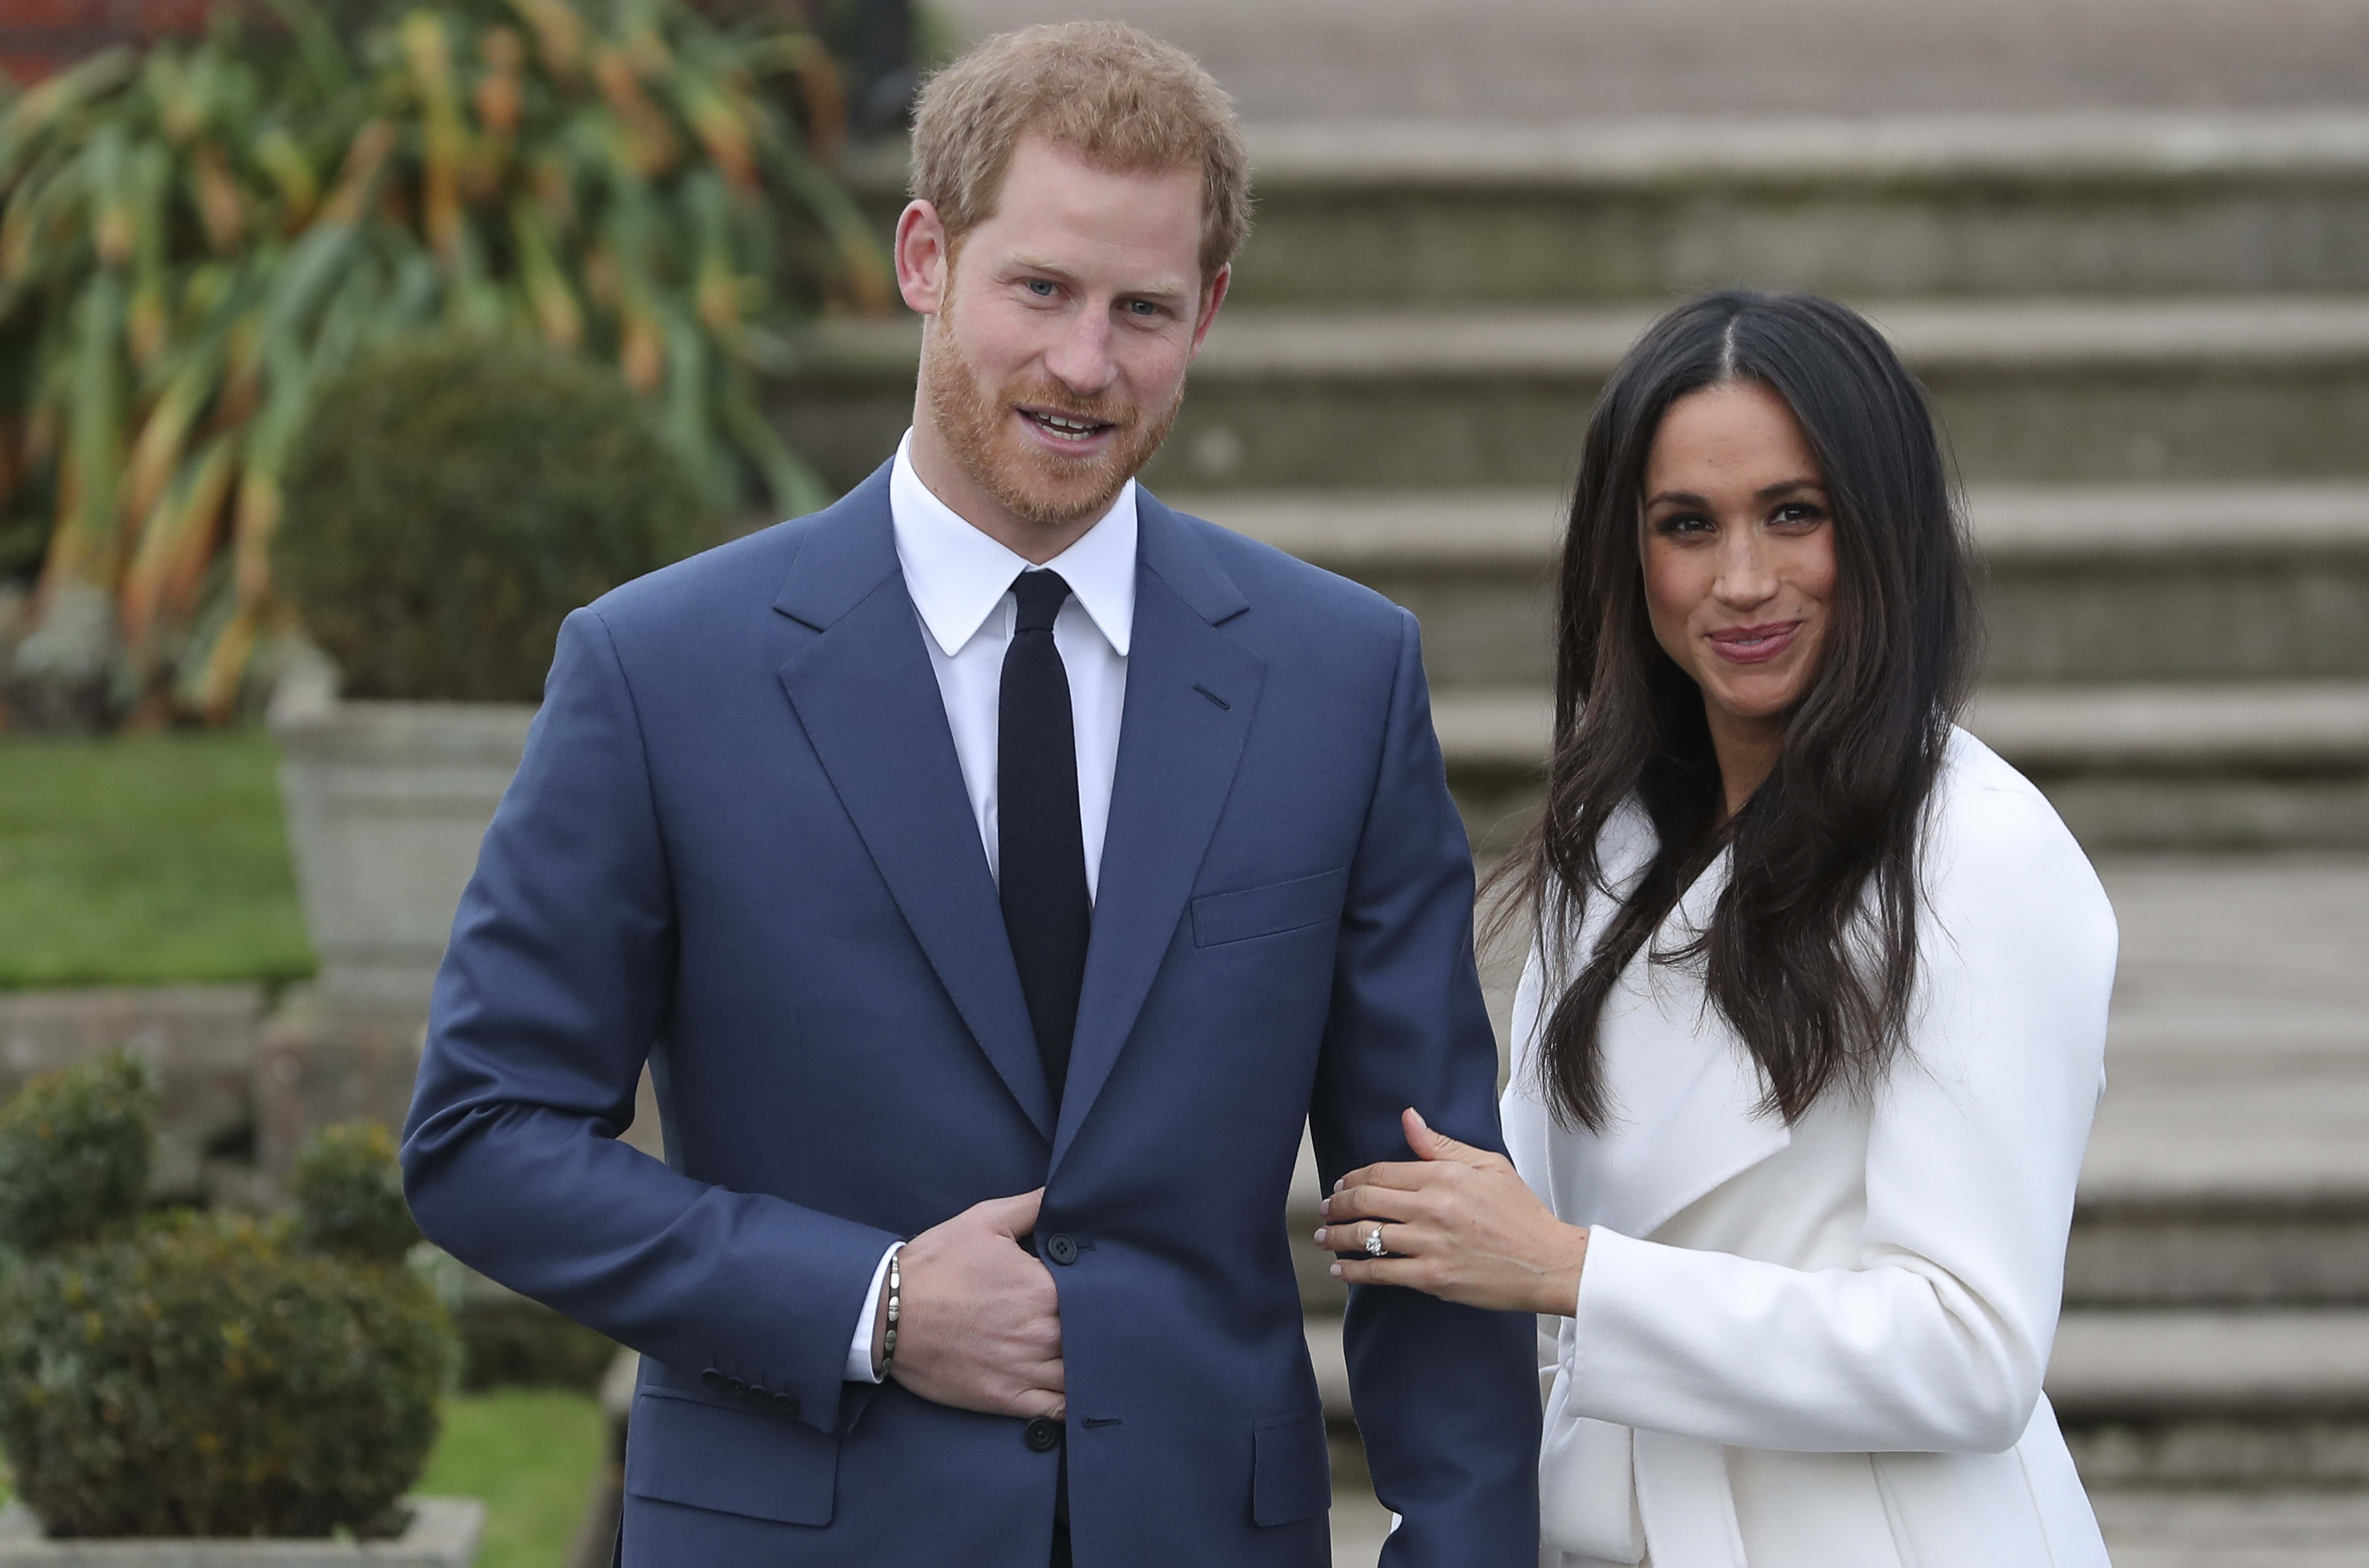 Prince Harry and Meghan Markle will marry at Windsor Castle in May.